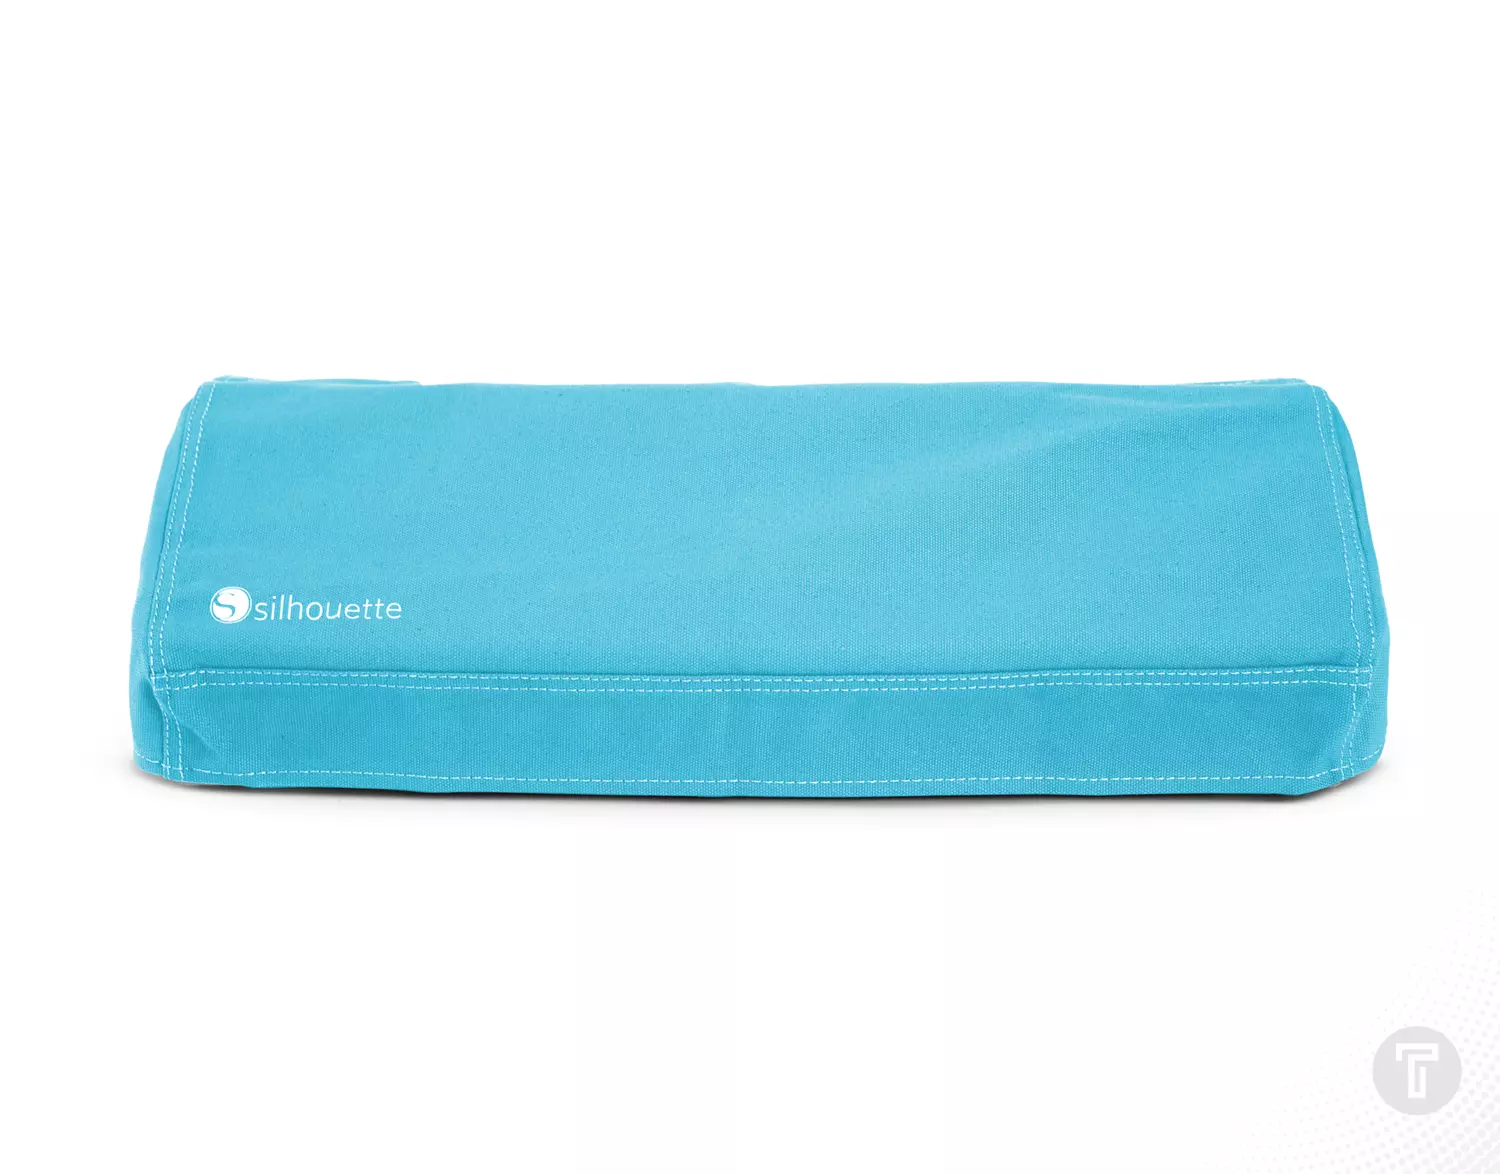 Silhouette cameo 4 dustcover blue